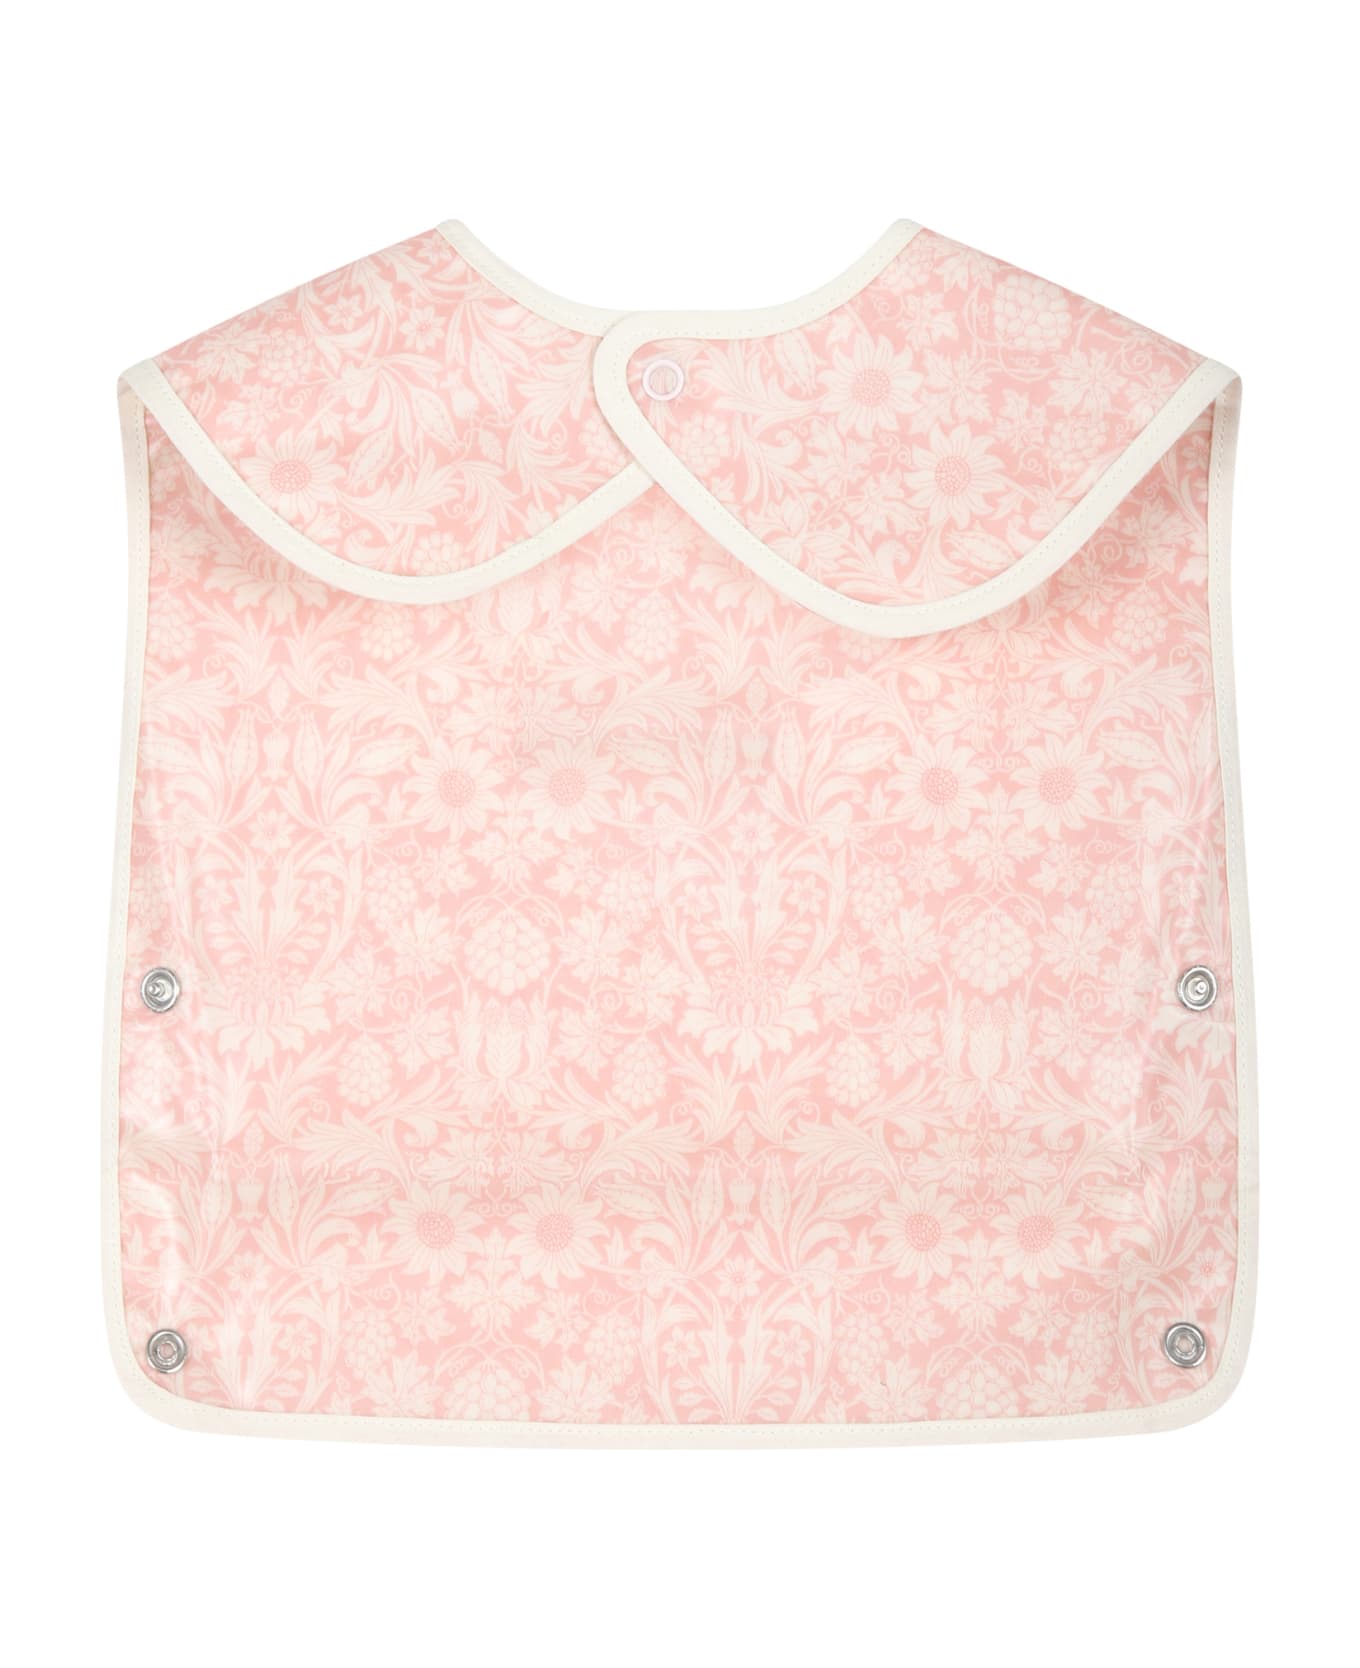 Bonpoint Pink Bib For Baby Girl With Flower Print - Rosa